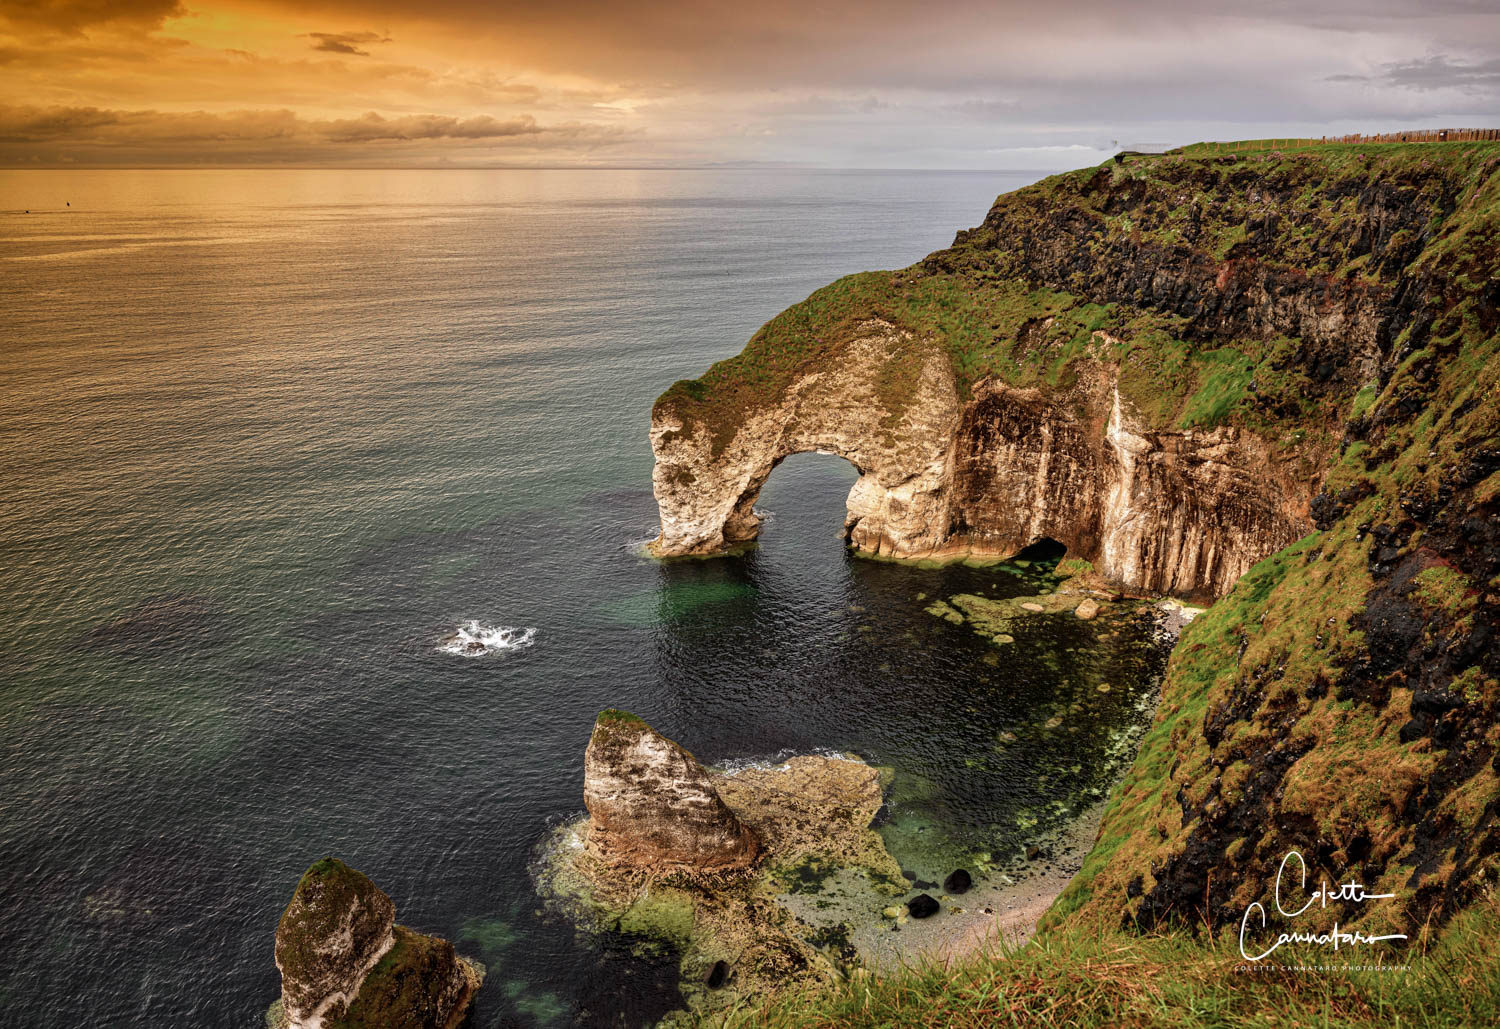 The Wishing Arch is located on Northern Ireland's Antrim Coast, with its breathtaking scenery and turquoise waters.